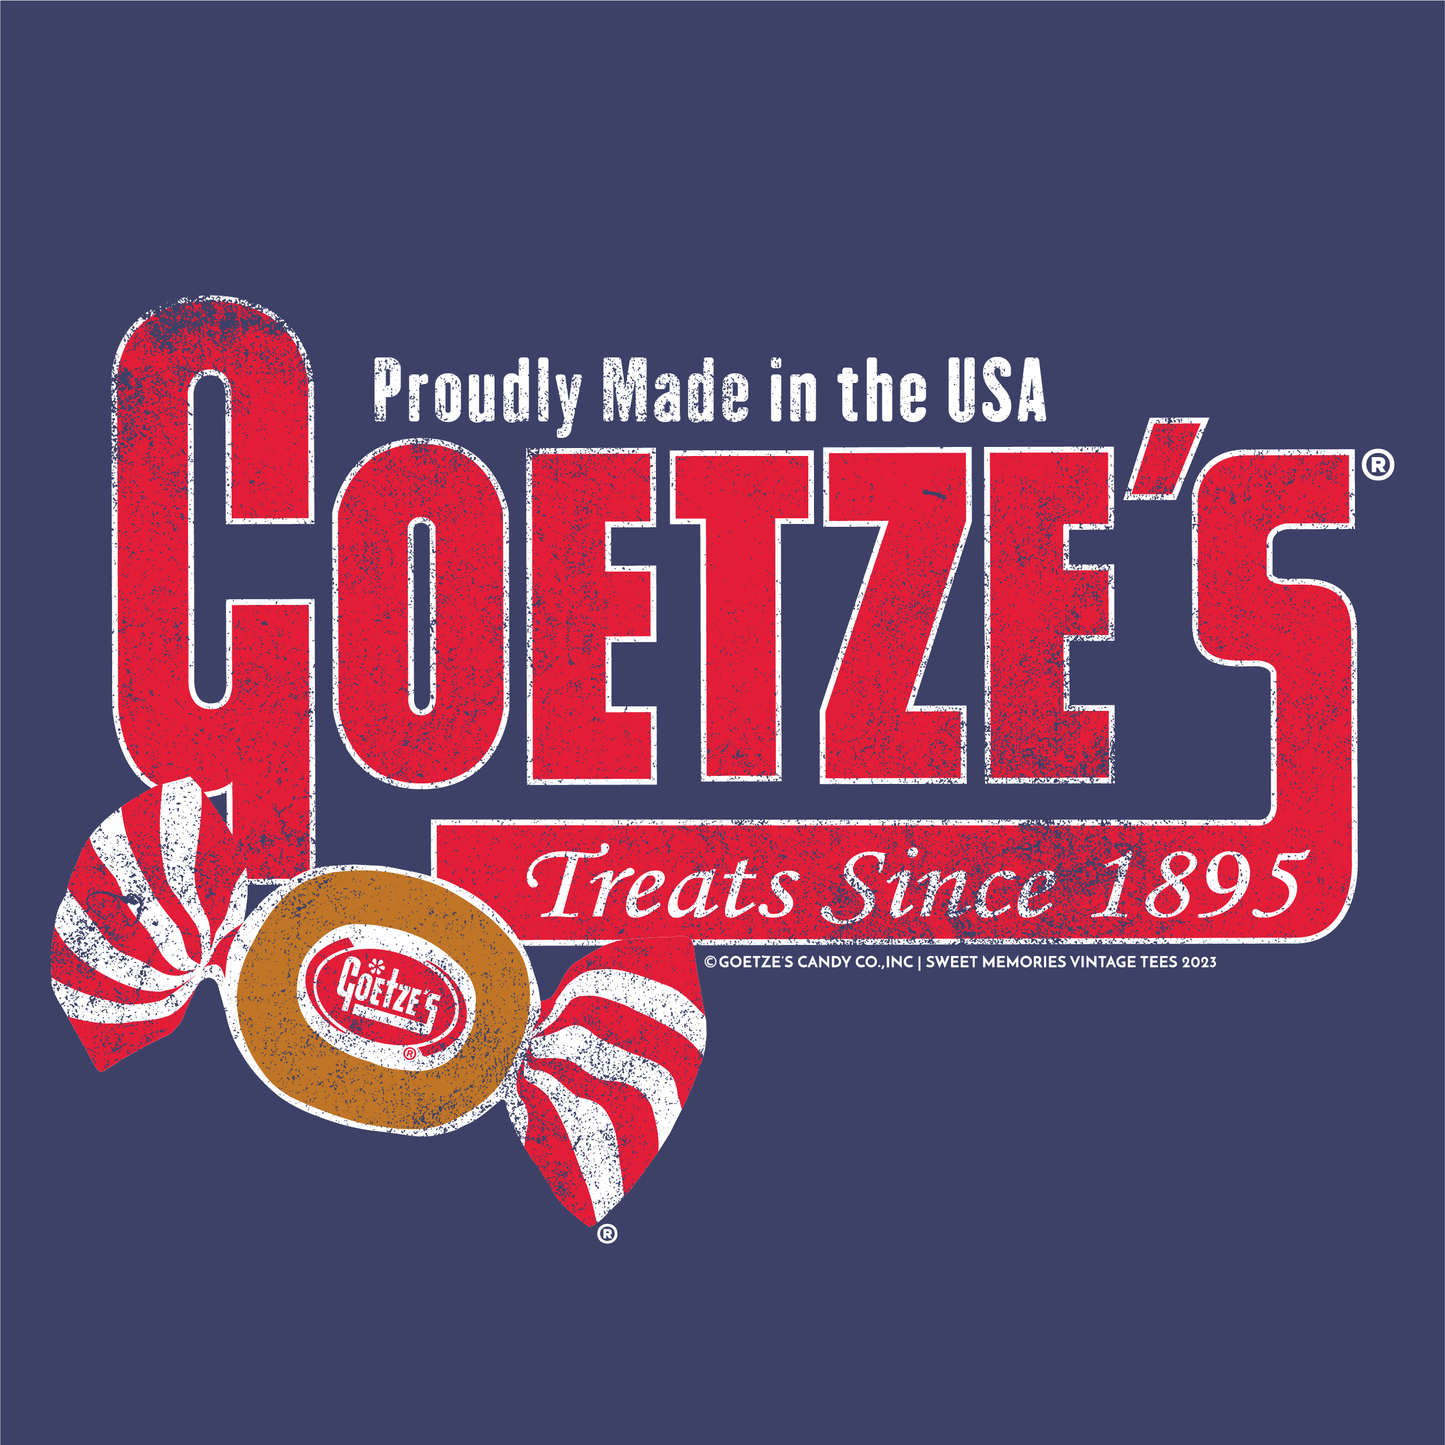 Goetze's Proudly Made in the USA Tee